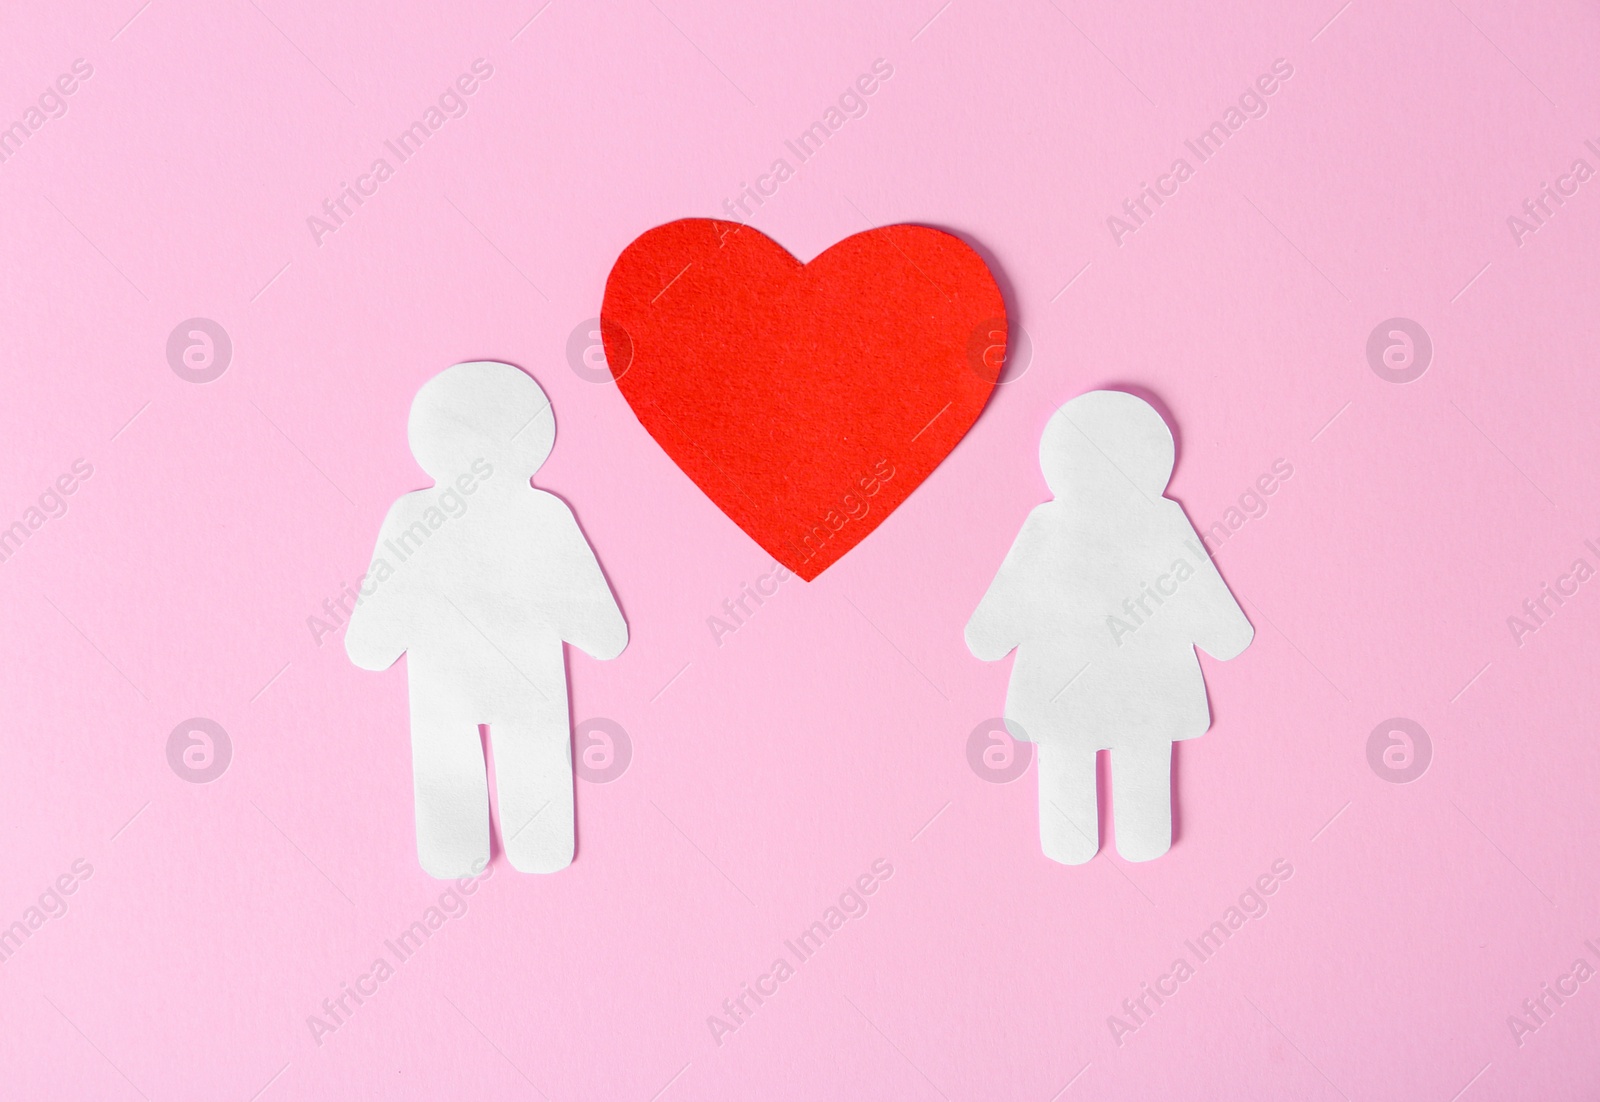 Photo of Paper couple with red heart on color background. Romantic feelings